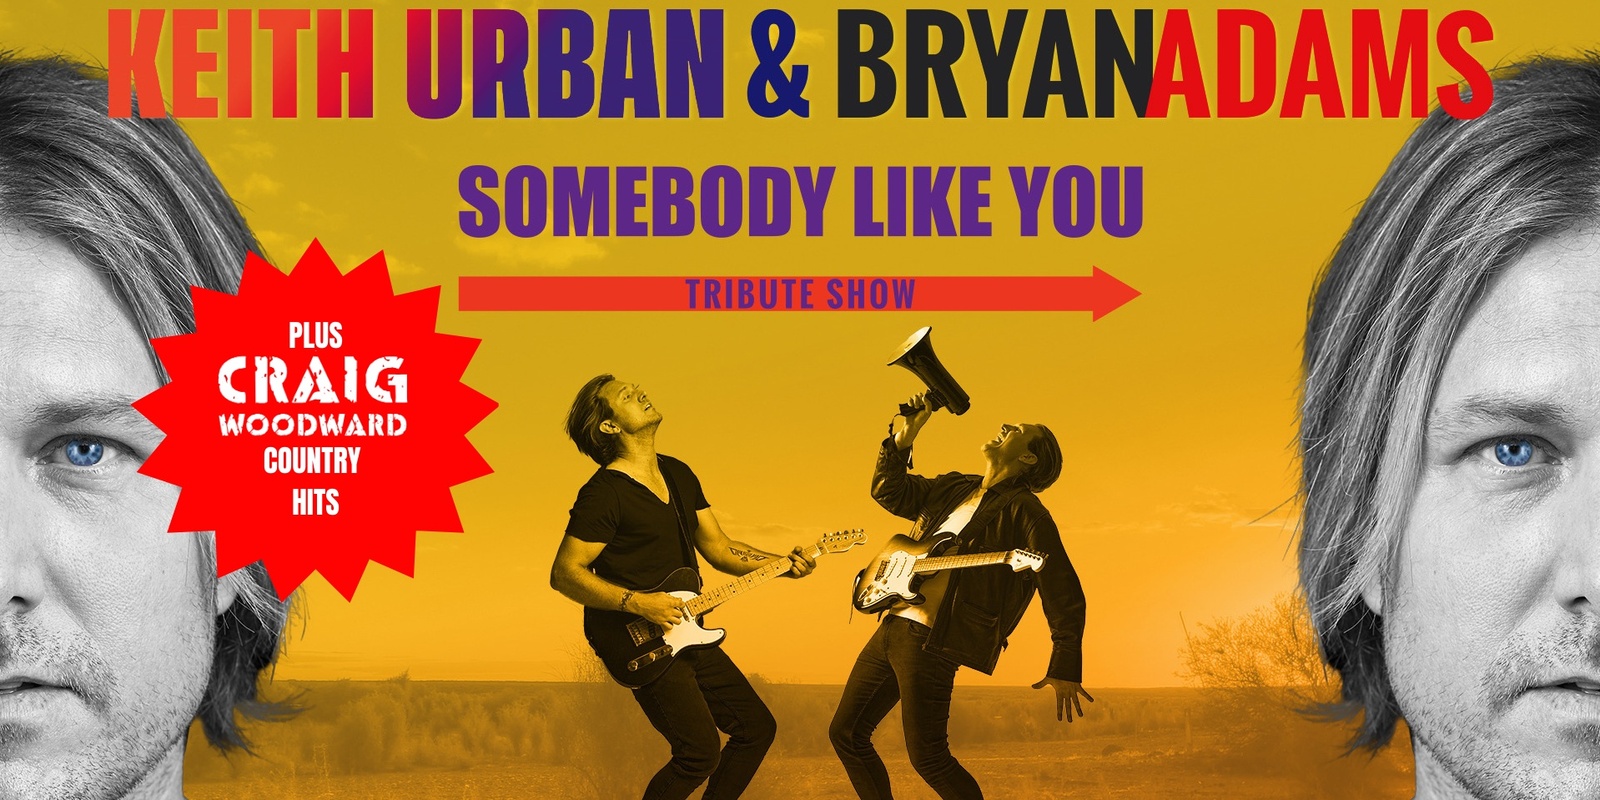 Banner image for Somebody Like You - Keith Urban & Bryan Adams Tribute